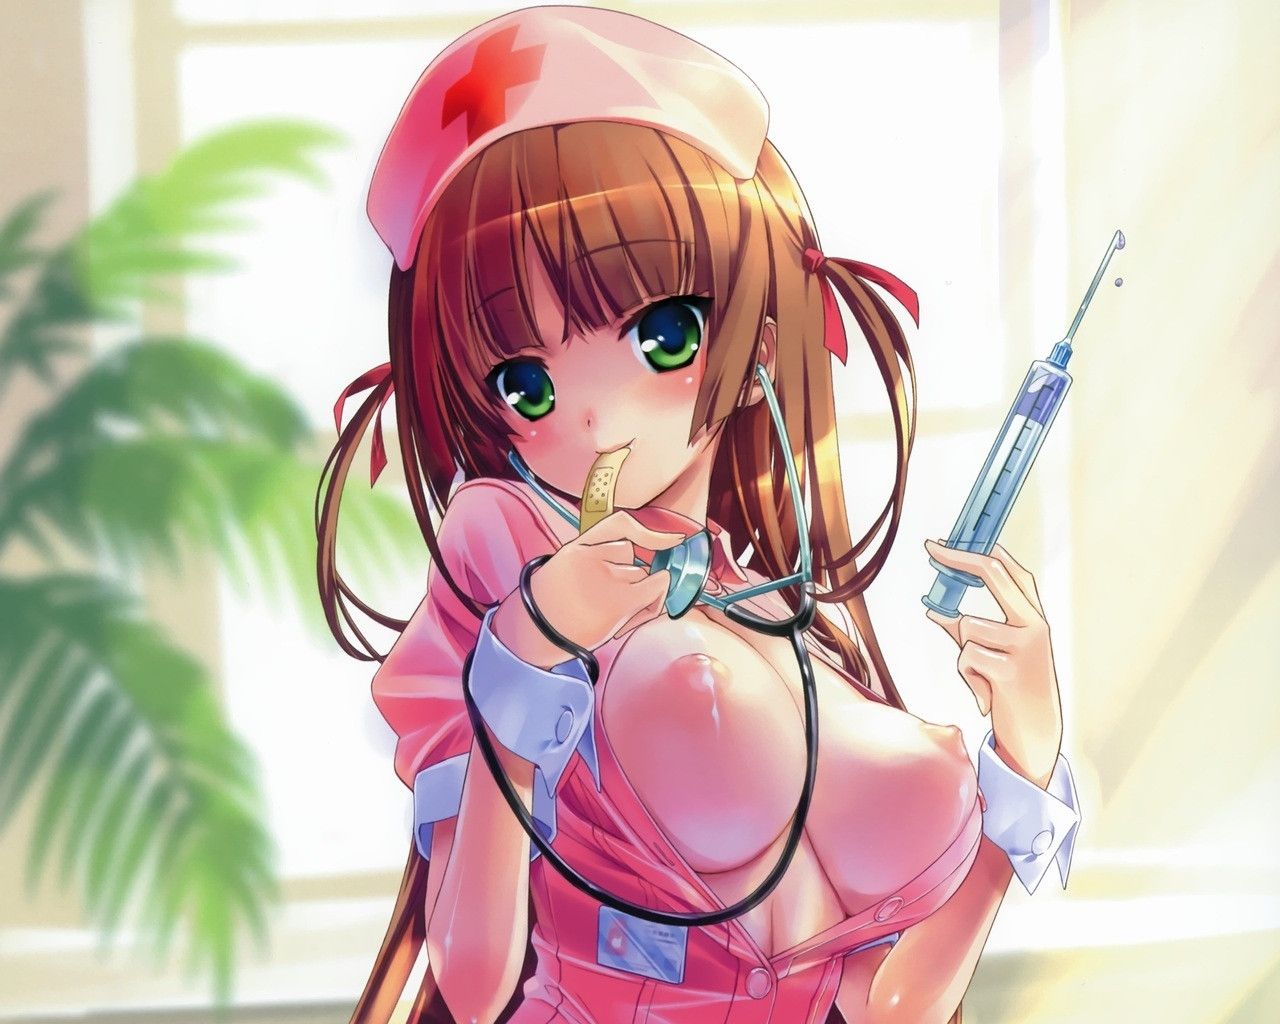 Nurse Uniform ass hole into the syringe, he turned and want to become pretty picture wwww part01 15